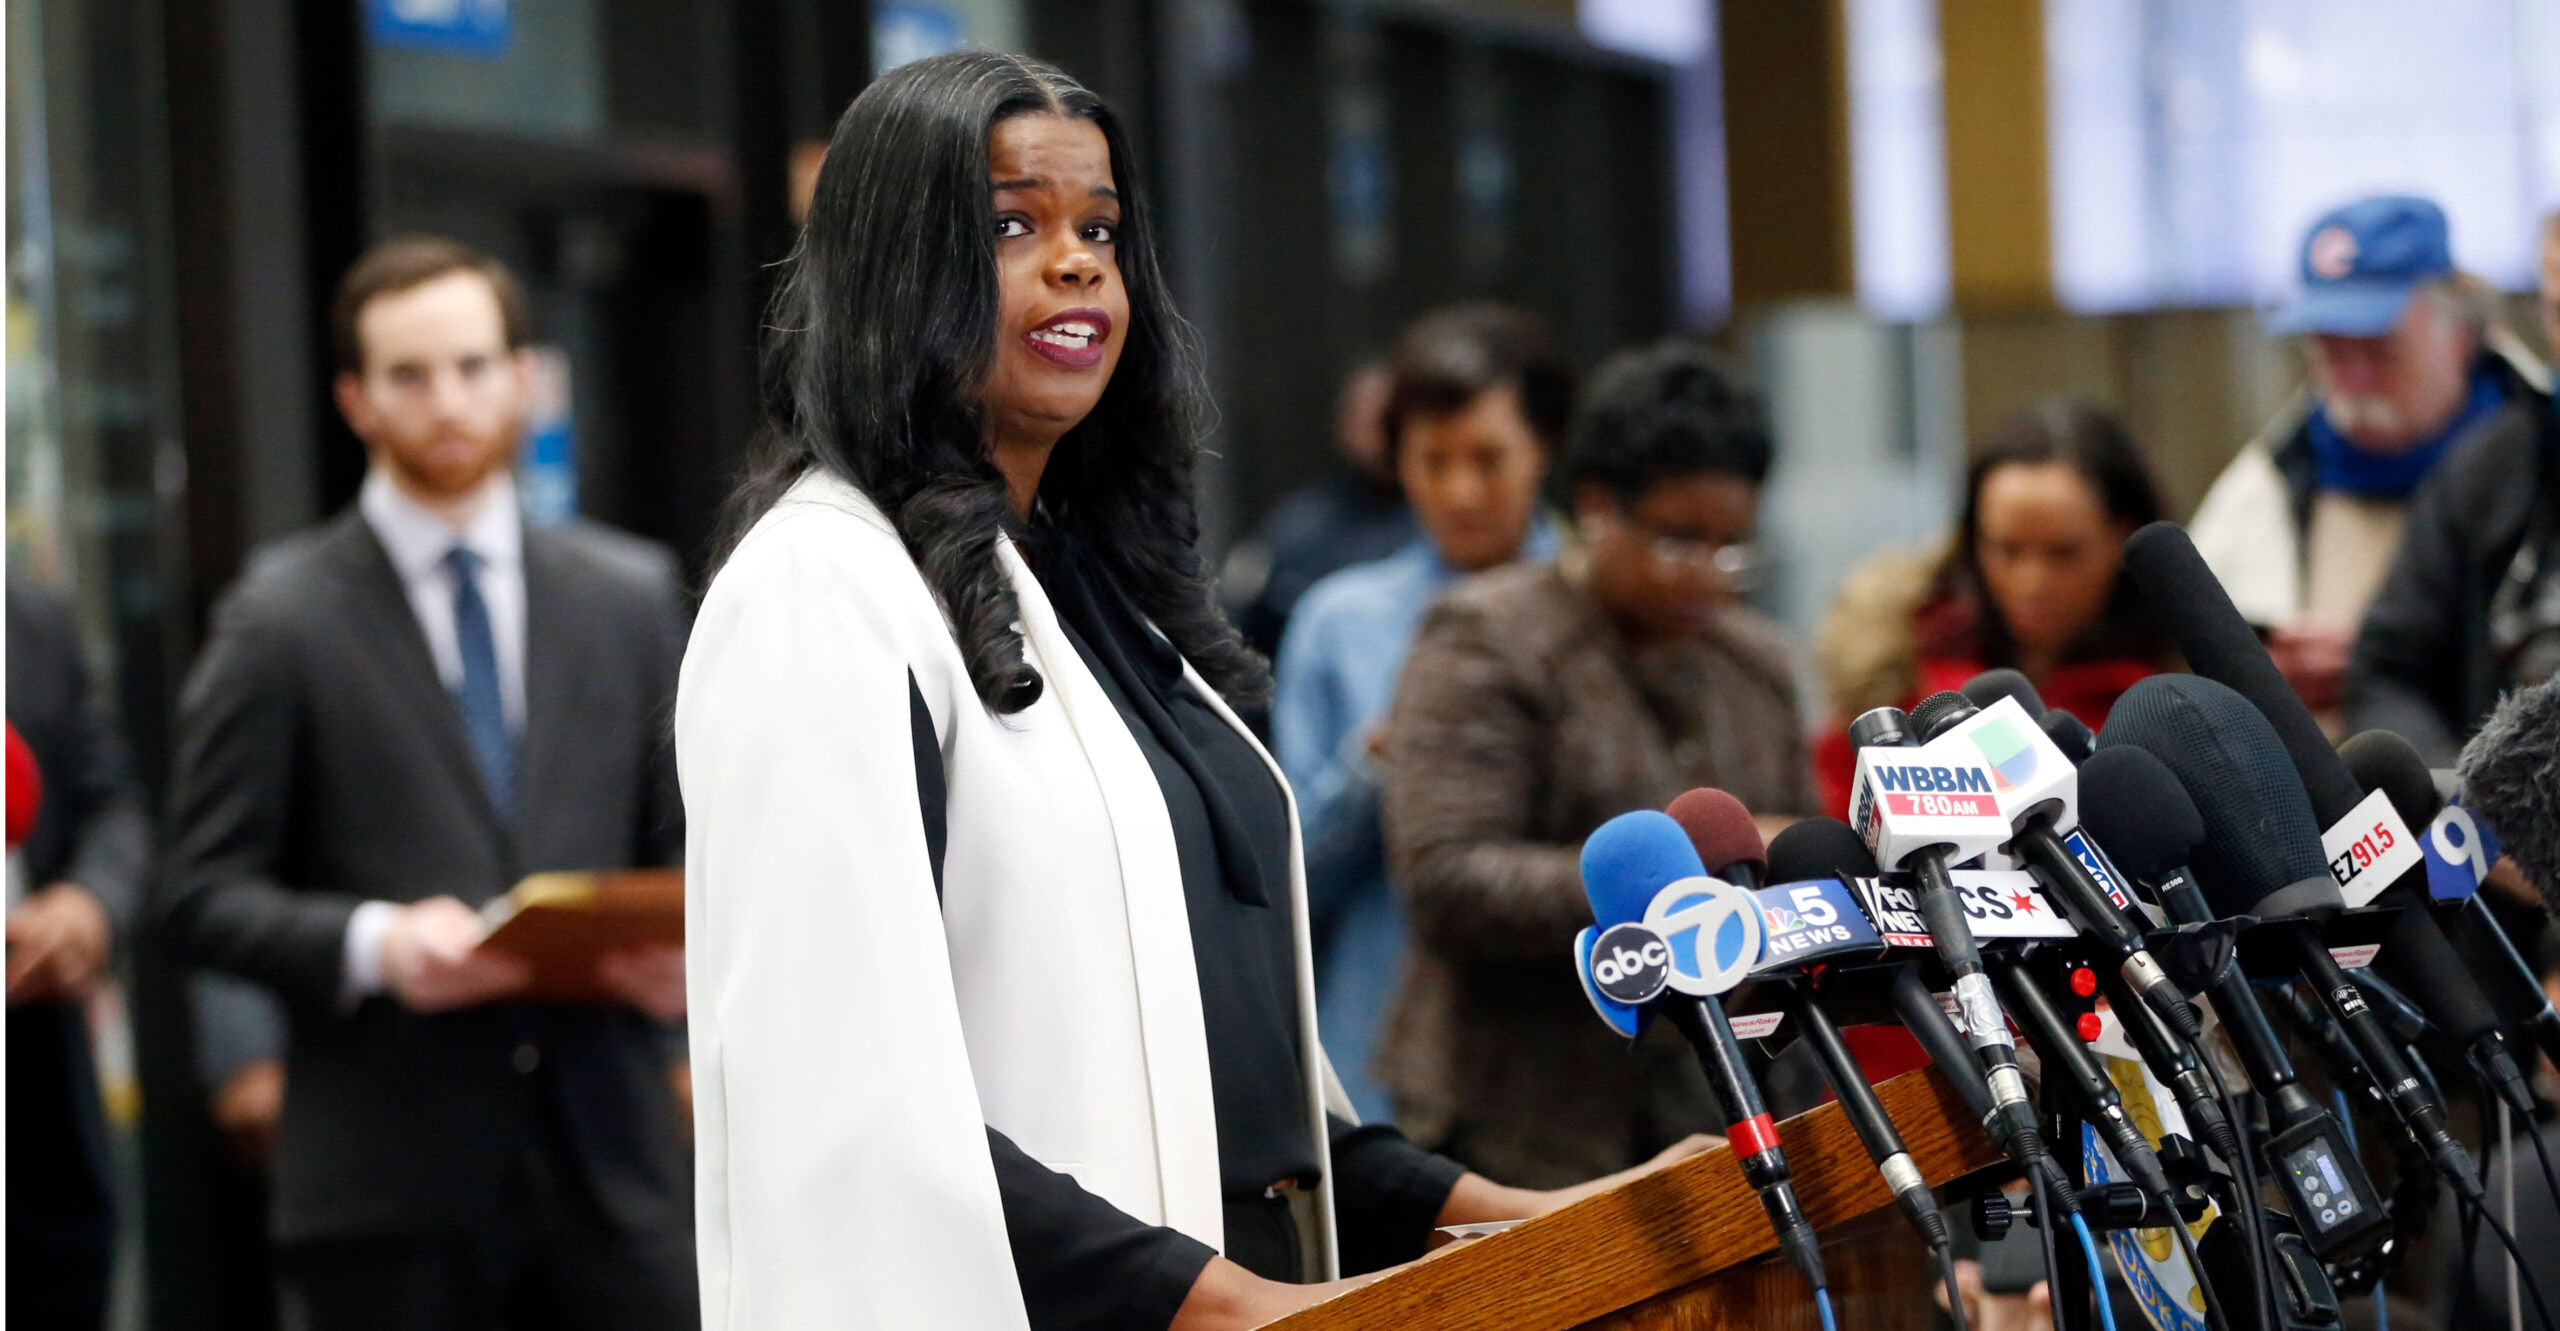 Meet Kim Foxx, the Rogue Prosecutor Whose Policies are Wreaking Havoc in Chicago